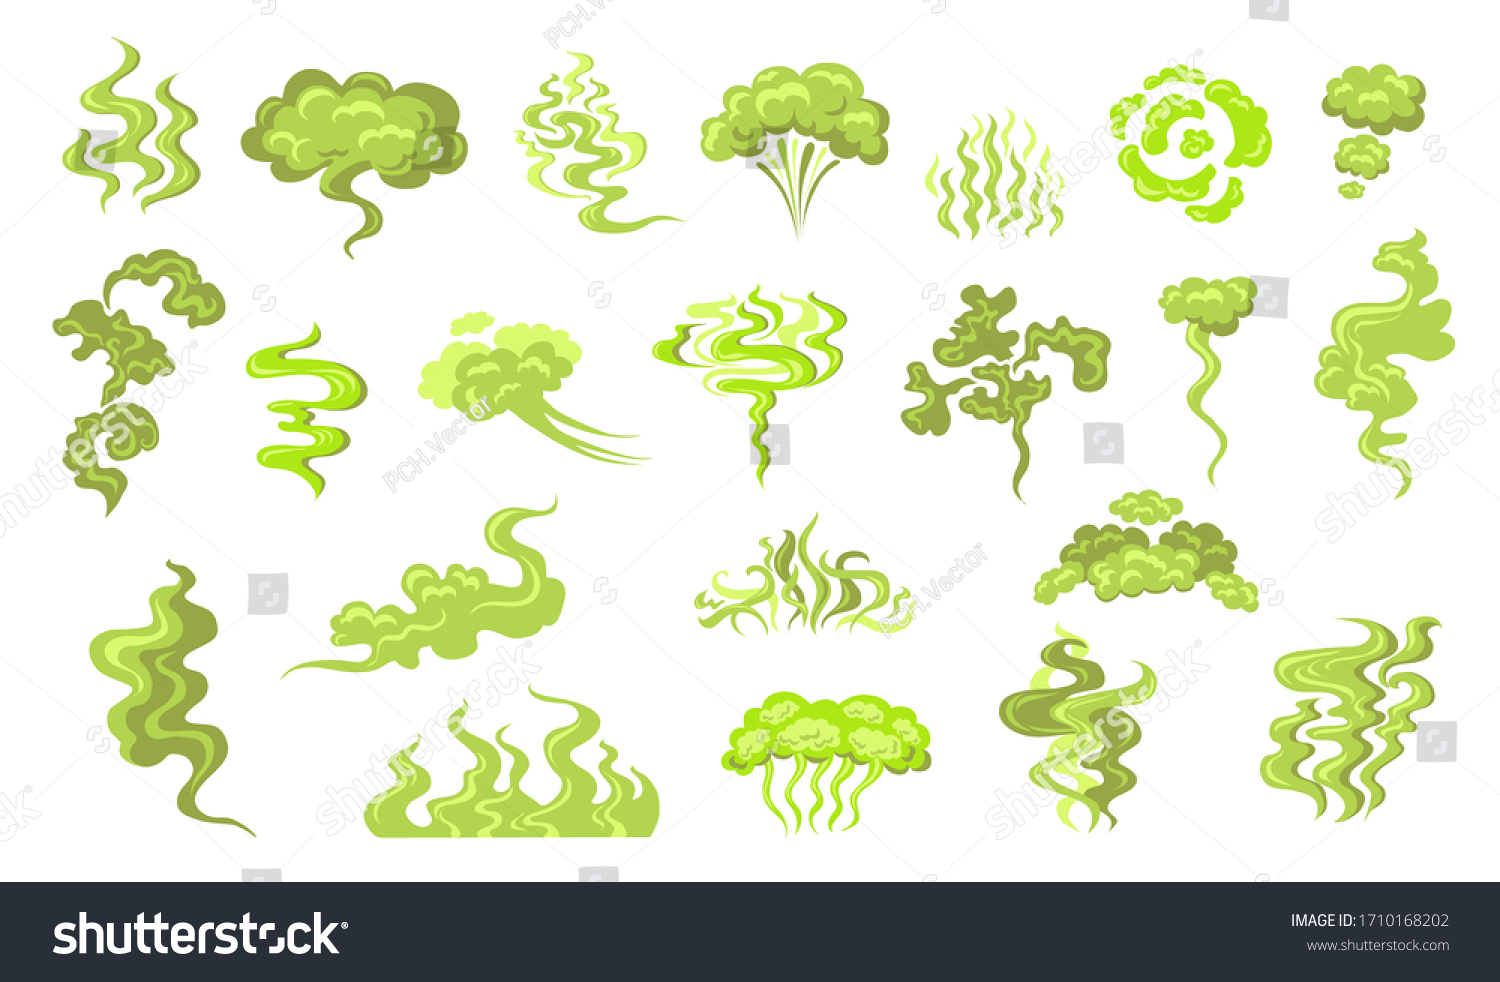 Smelling smoke flat icon kit. Cartoon bad odor cloud, green stinky aroma and dirt toxic steam vector illustration set. Smell breath and stink fart stench concept #1710168202